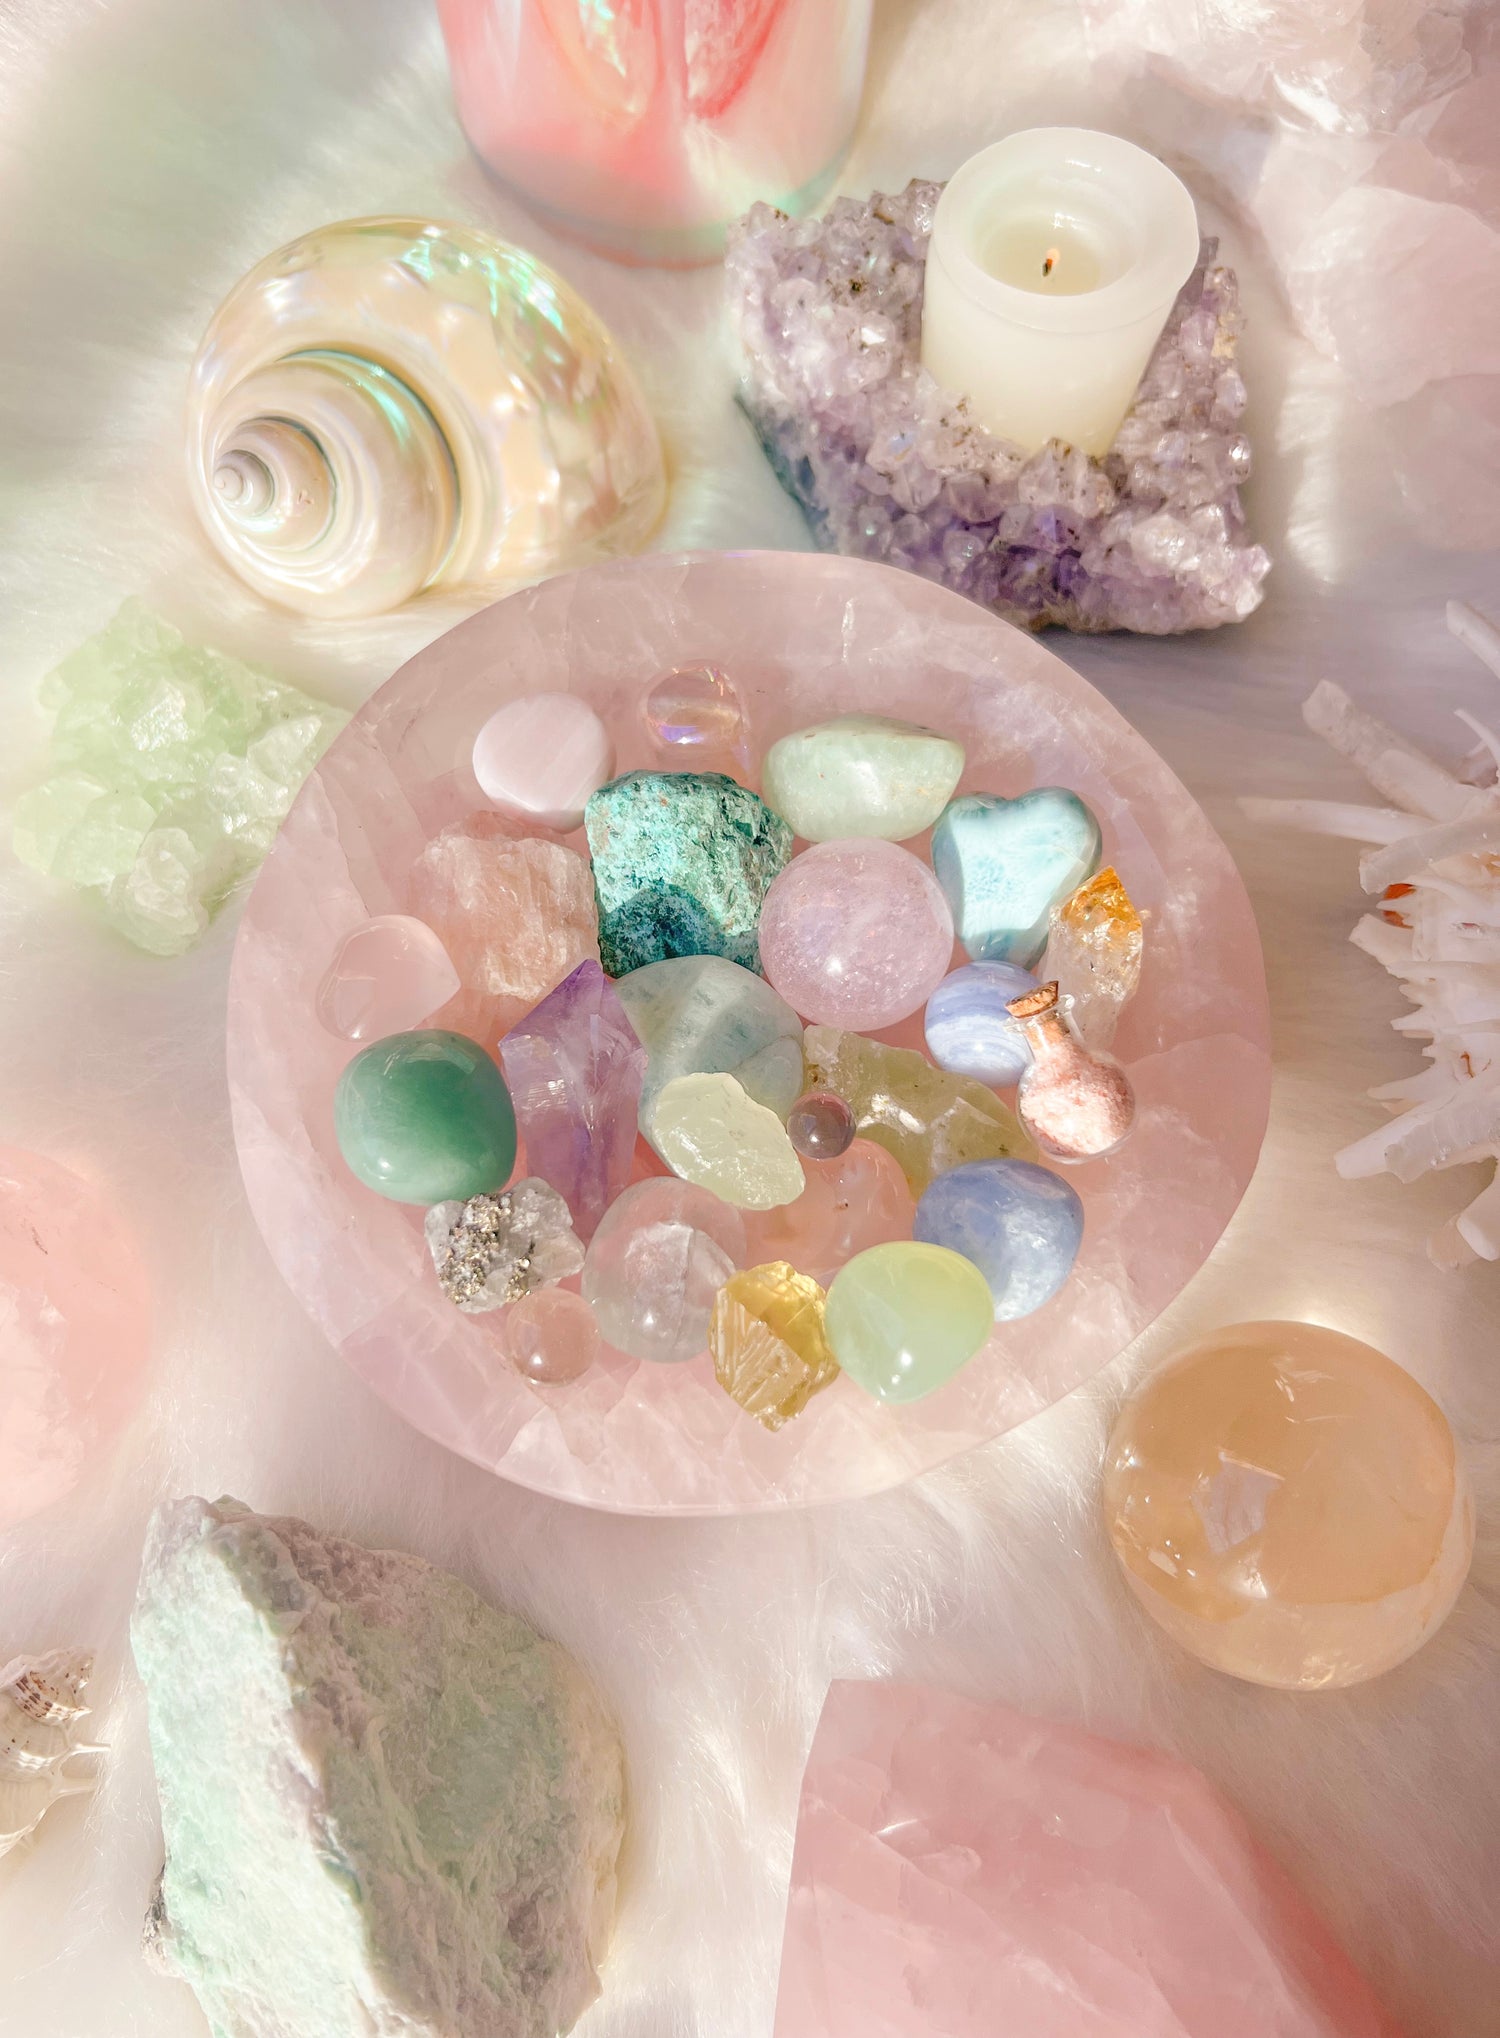 Crystals and Energy Healing